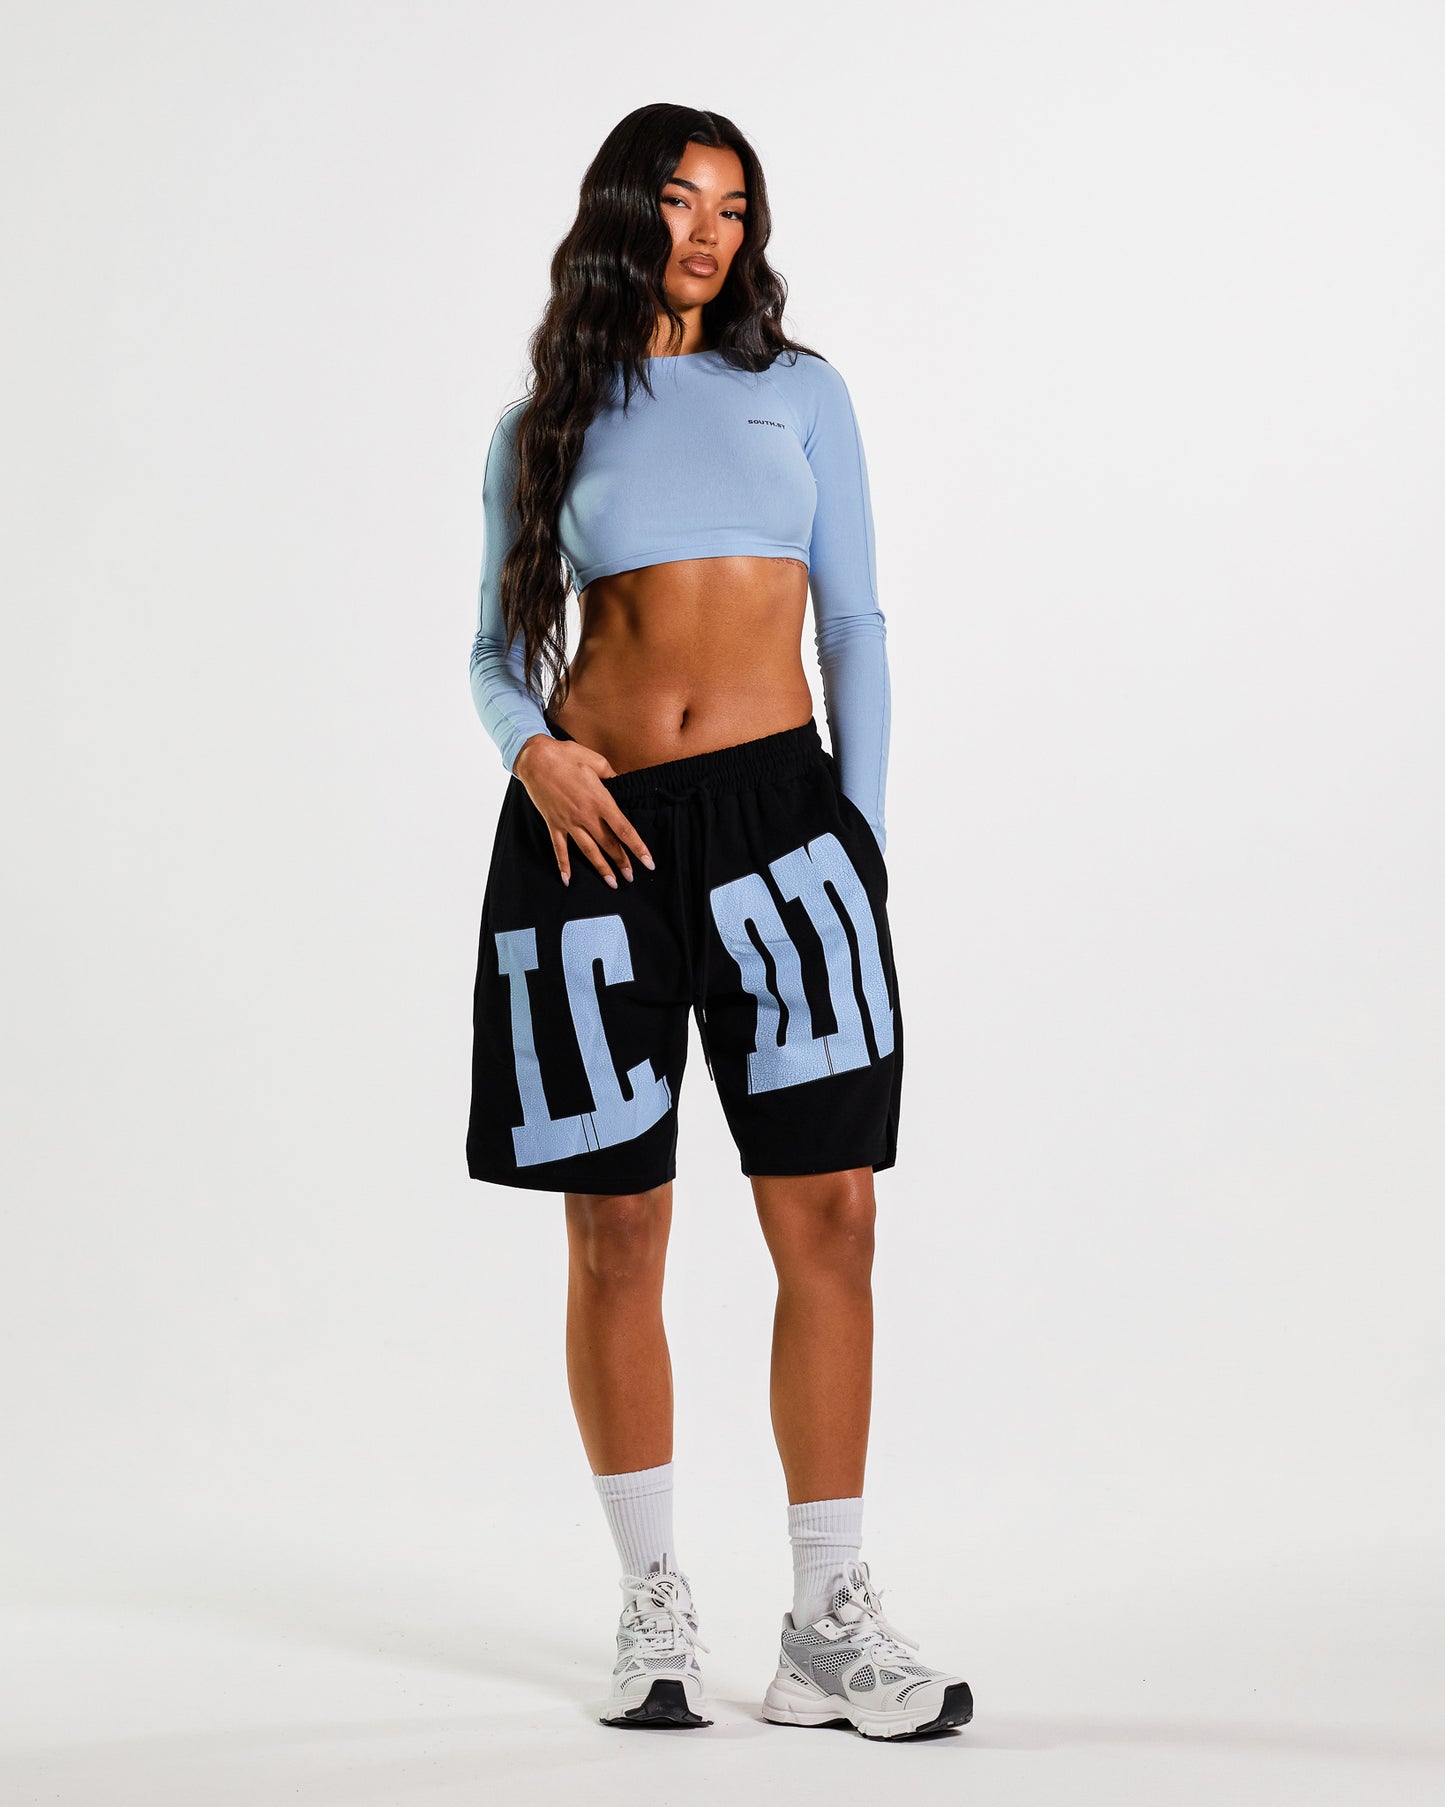 "ARCHIVED" LONG SLEEVE CROP